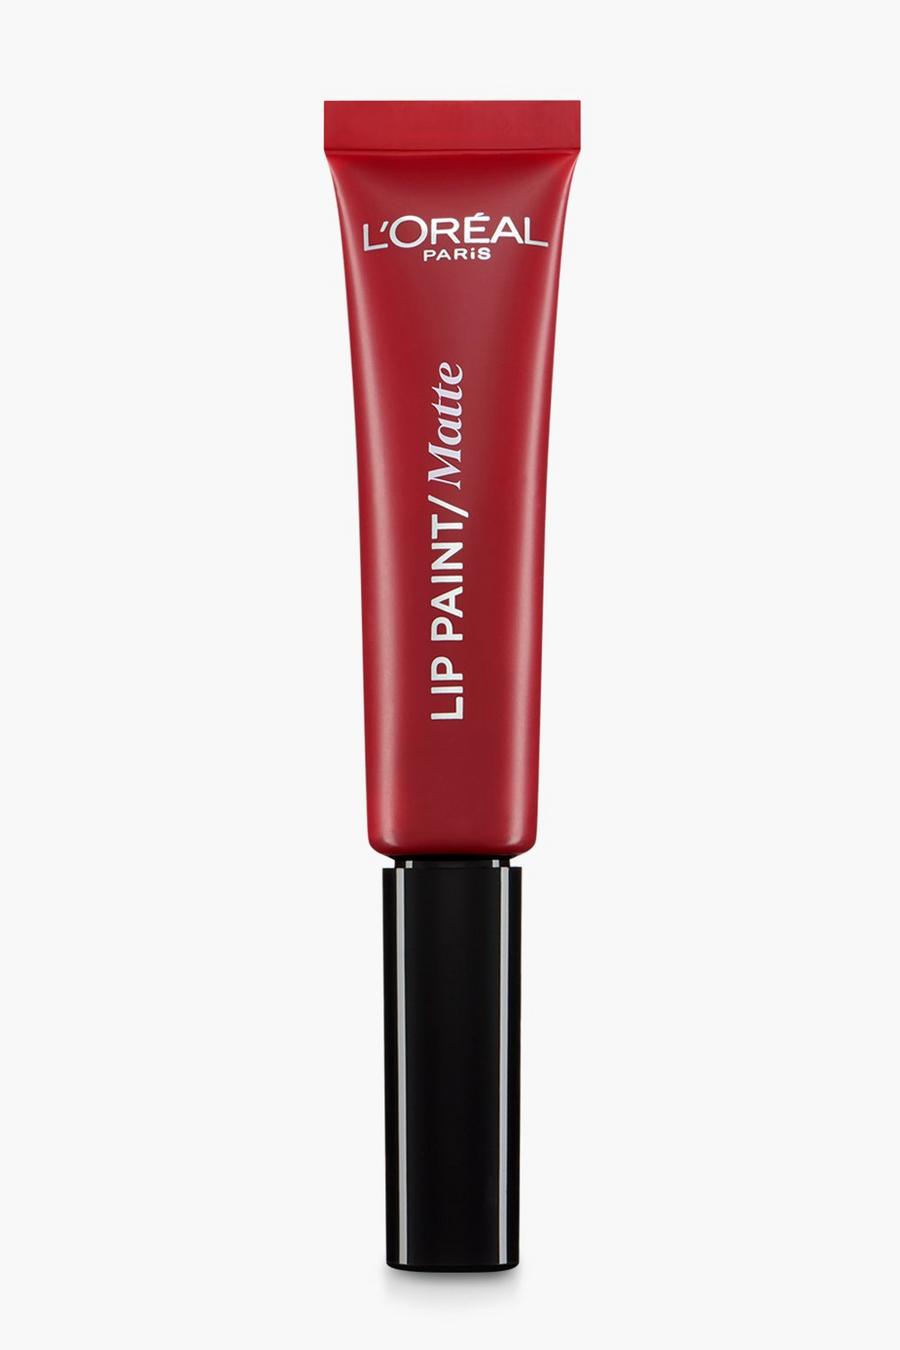 L'Oreal Infall Rossetto liquido - Apocalypse Red 205, Rosso image number 1